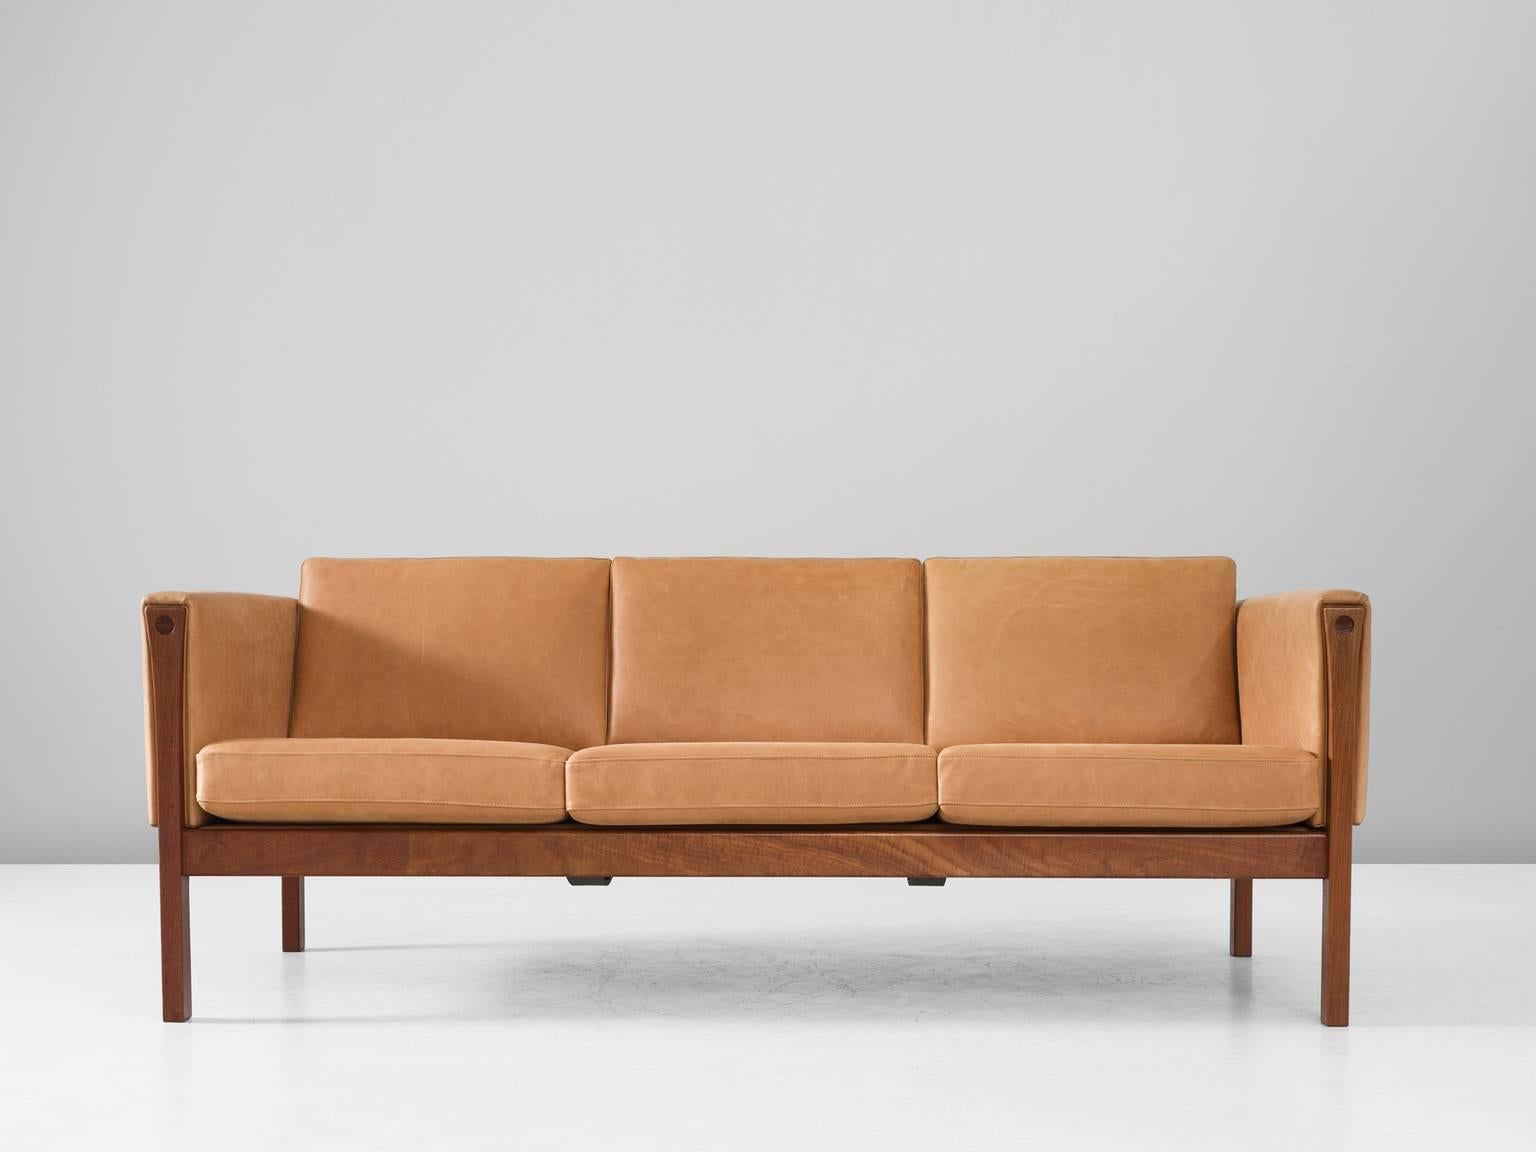 Three-seat sofa model AP62, in black leather and teak, by Hans J. Wegner, Denmark, 1960s. 

Excellent designed sofa by Hans Wegner. The straight lines of this design show an amazing elegance. The teak frame is well proportioned. The way the legs